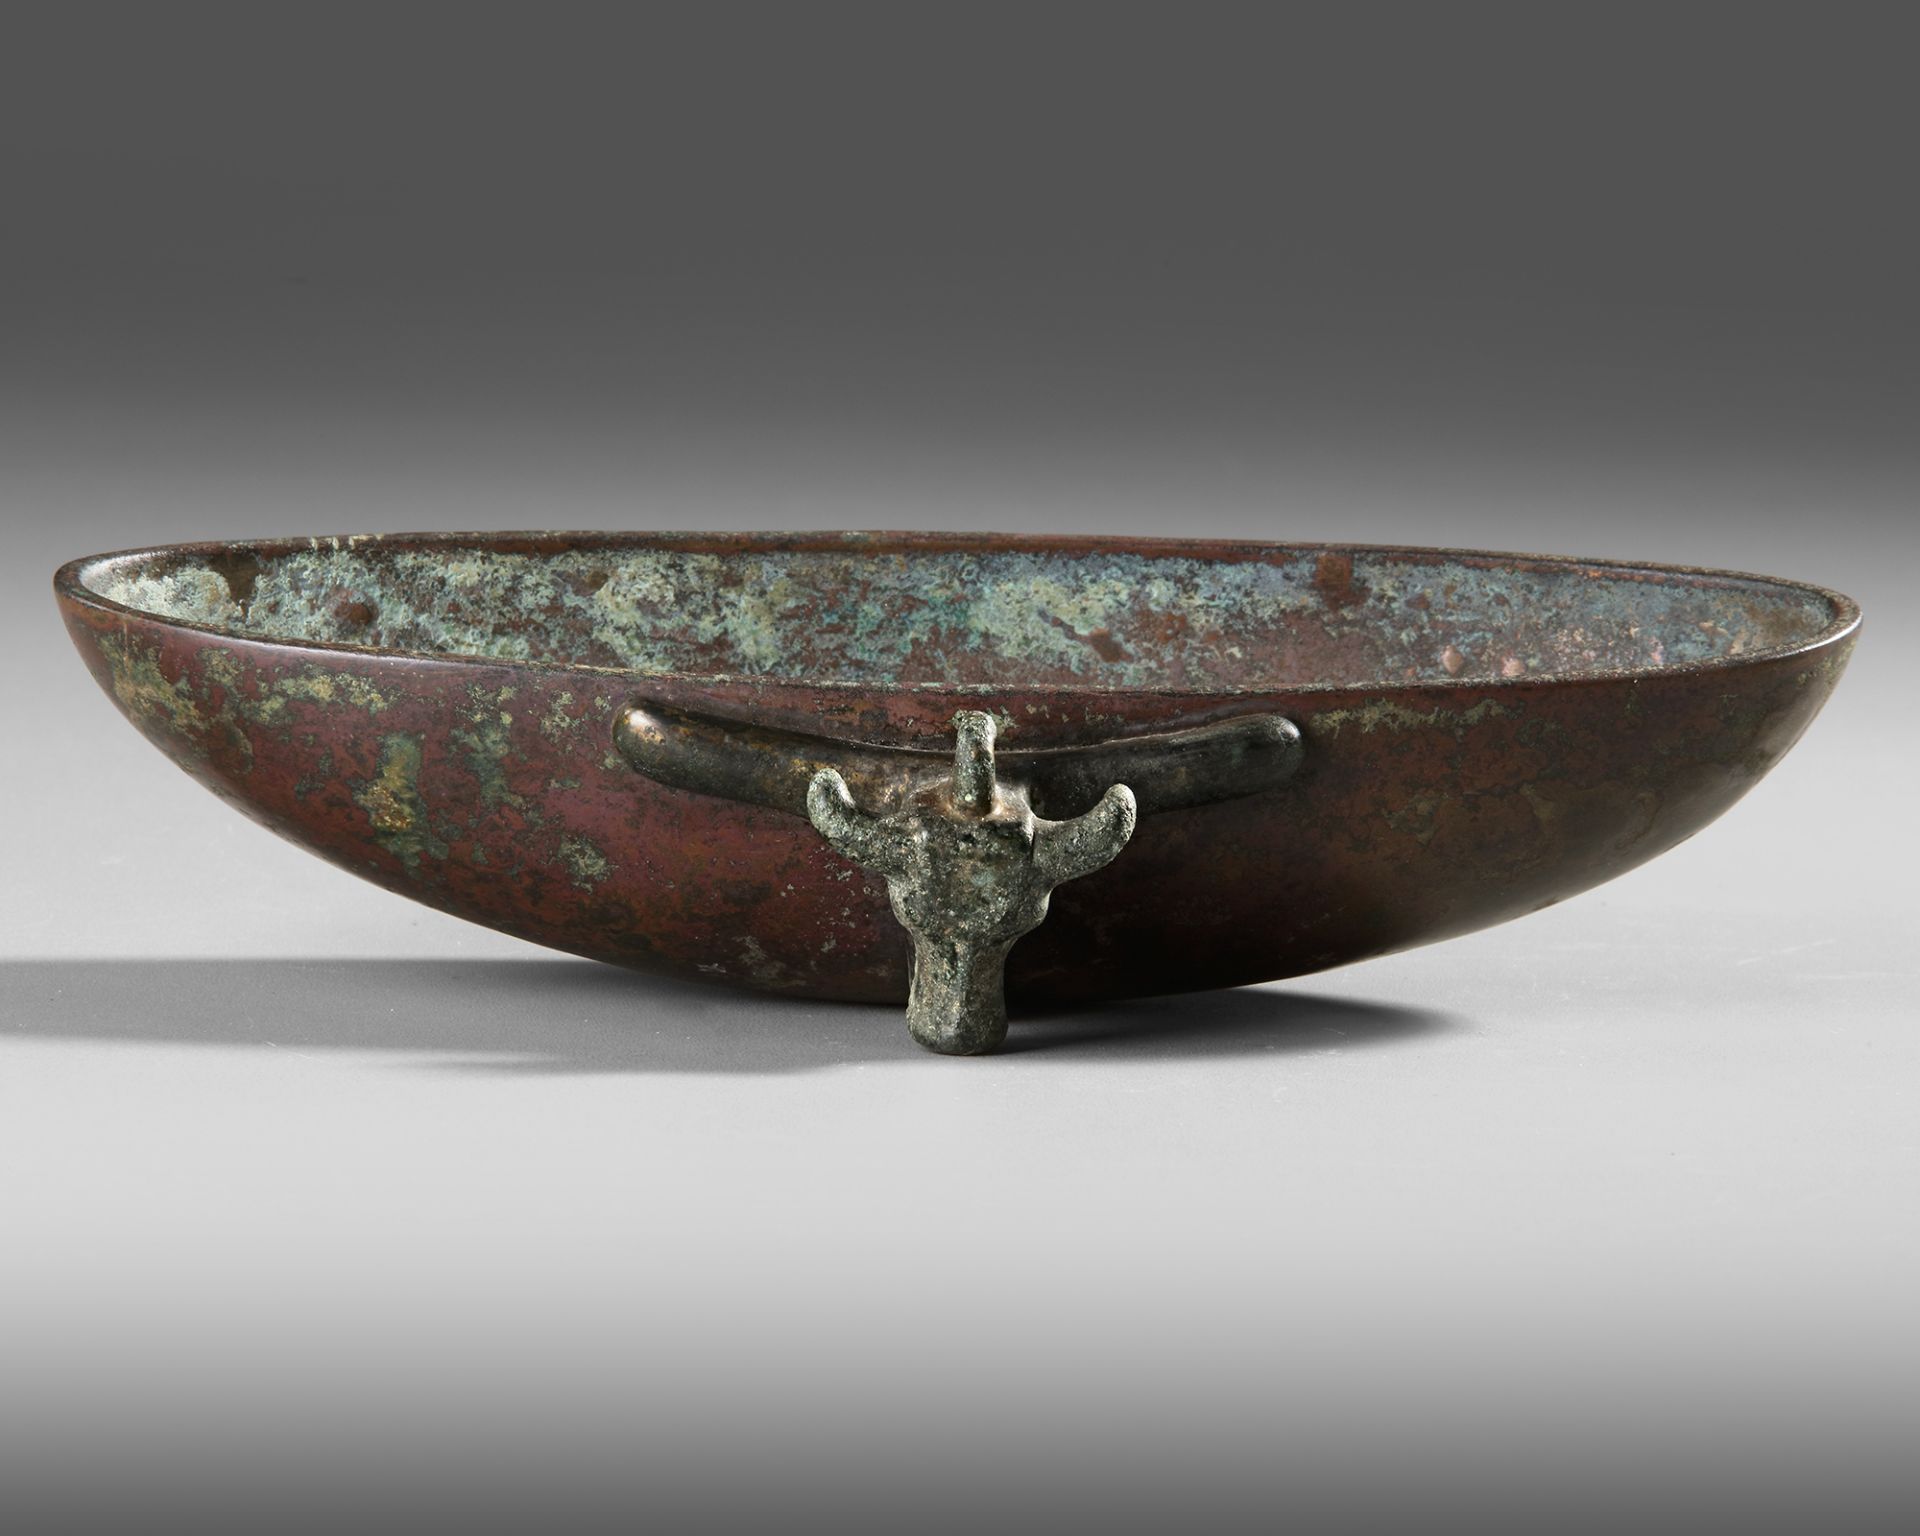 A BRONZE CUP, PHRYGIEN/WEST ASIA, 8TH-6TH CENTURY BC